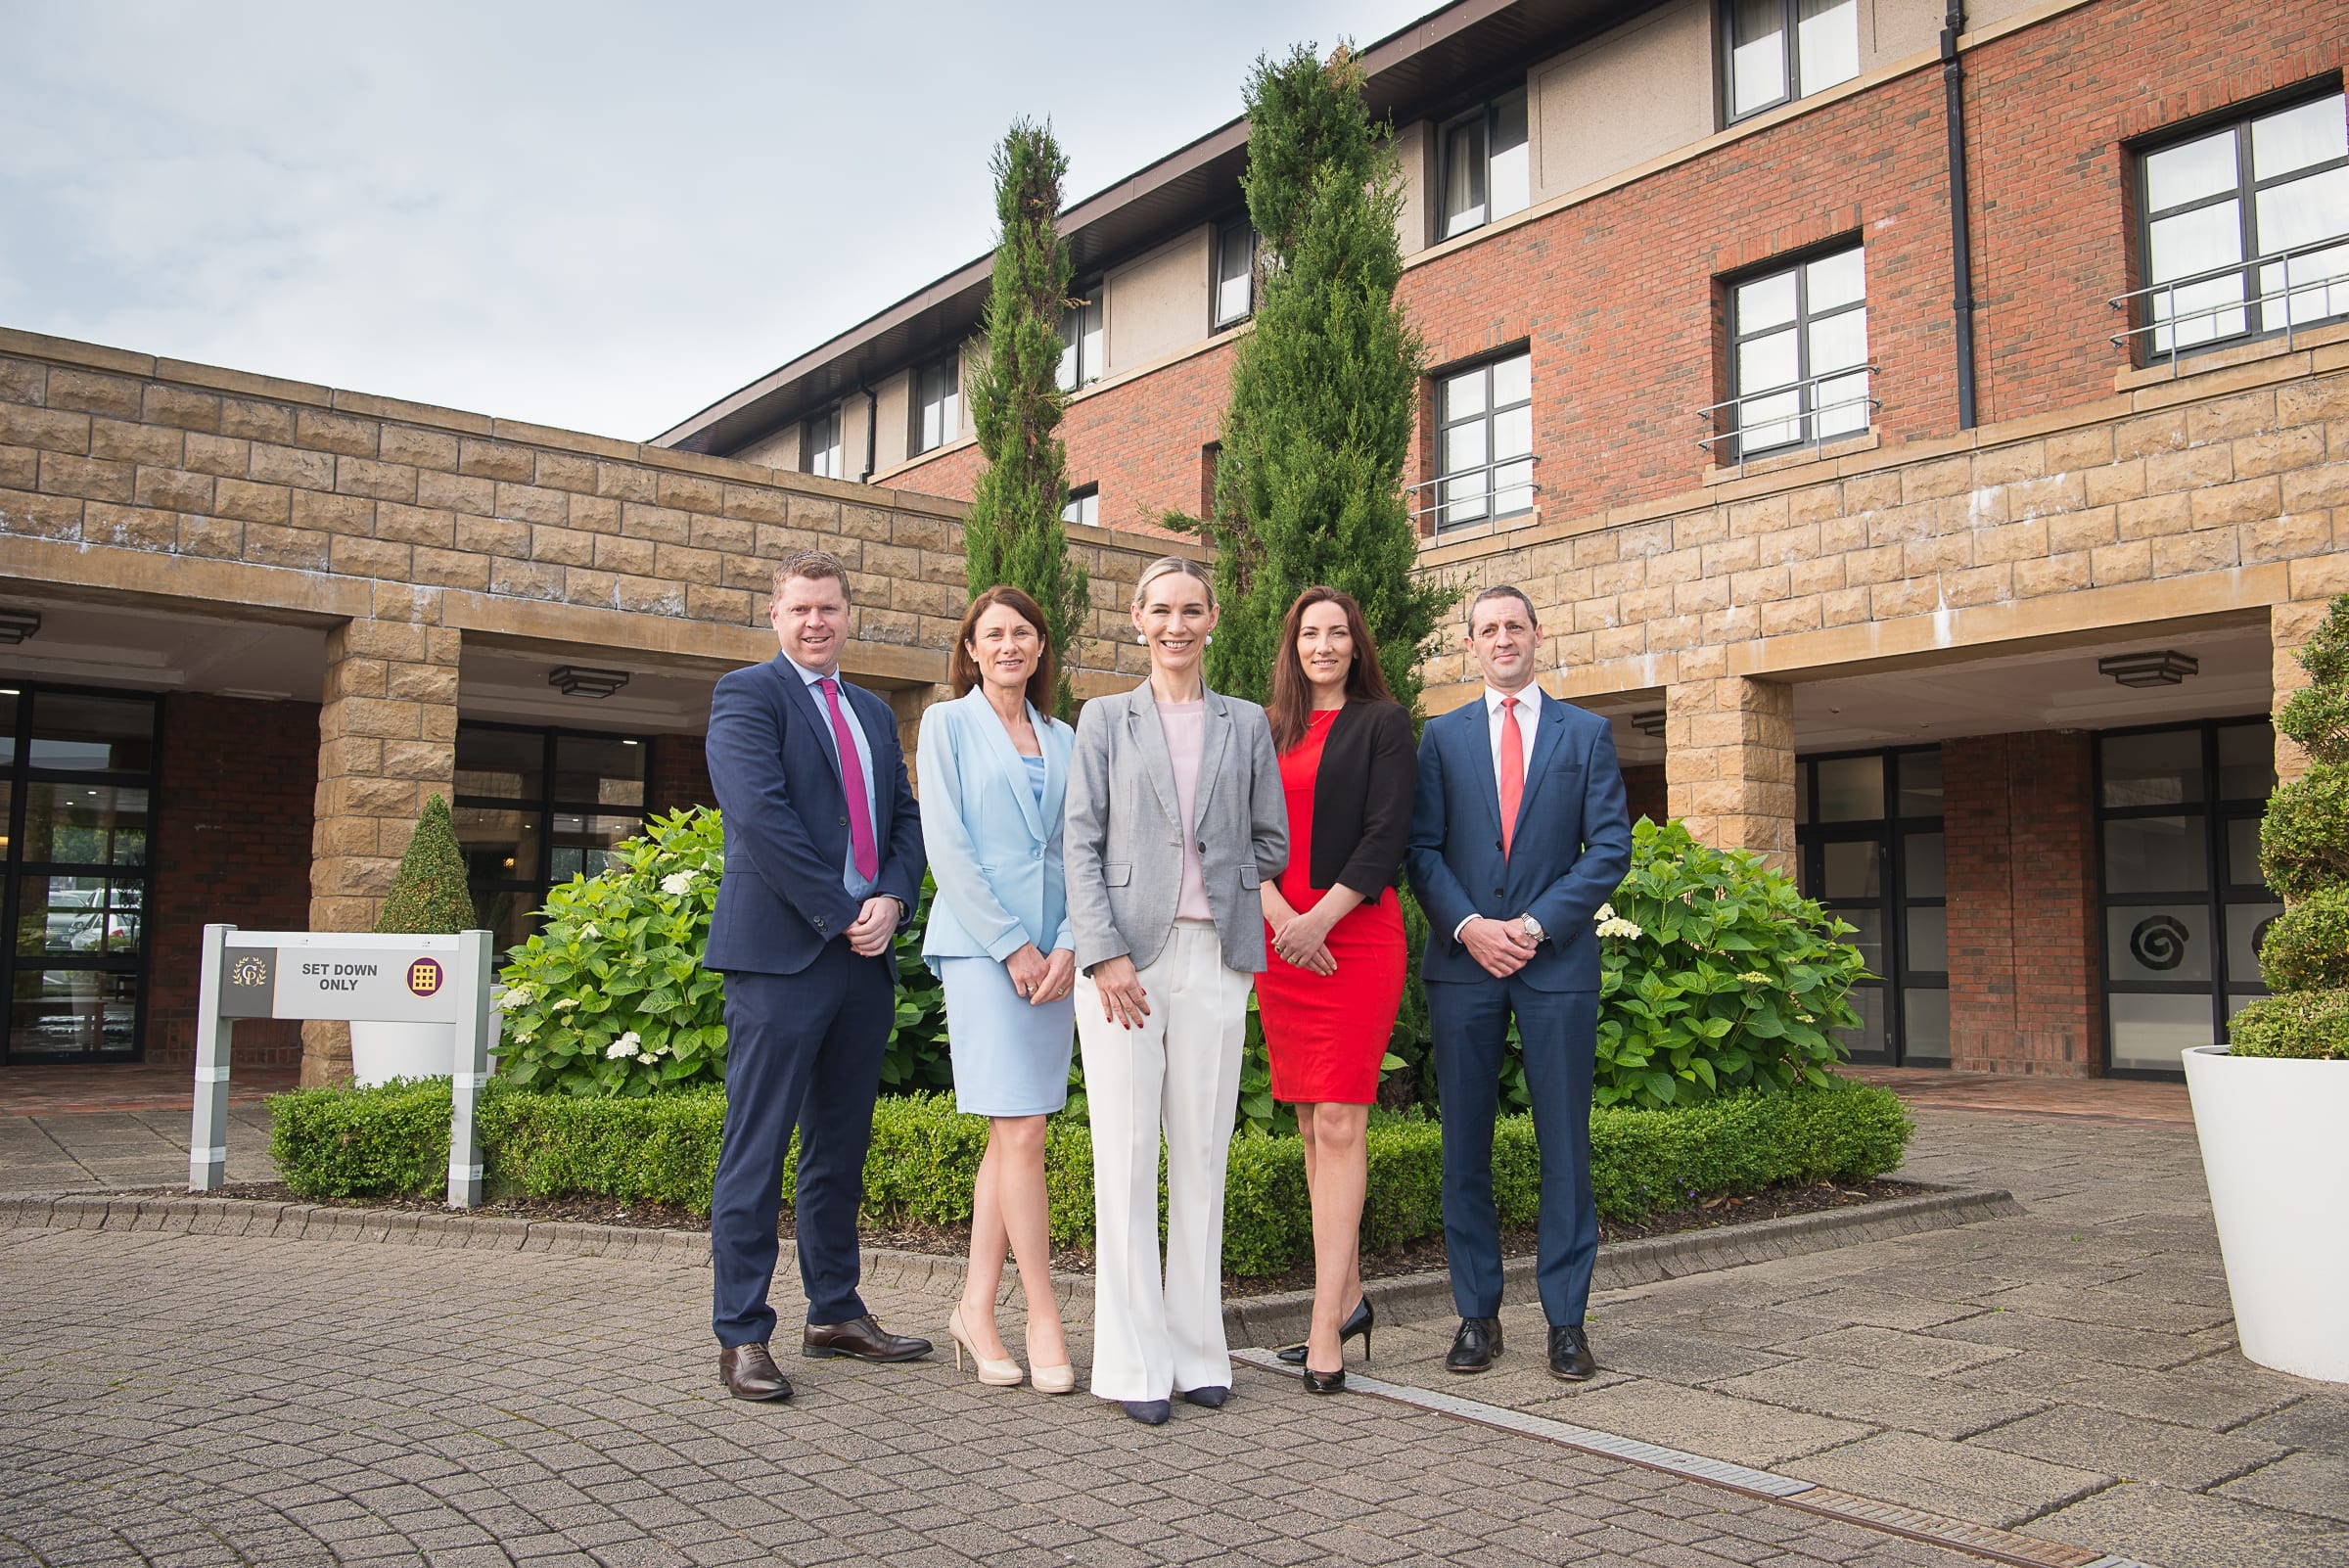 From Left to Right:  Launch of Limerick Chamber President Awards held in the Castletroy Park Hotel on 25th June 2019: Eoin Ryan - Limerick Chamber President / HLBMGR, Mary Considine - Acting CEO Shannon Group, Deirdre Ryan - CEO Limerick Chamber, Gillian Barry -  LIT, Kieran Considine, - AIB
Photo by Morning Star Photography